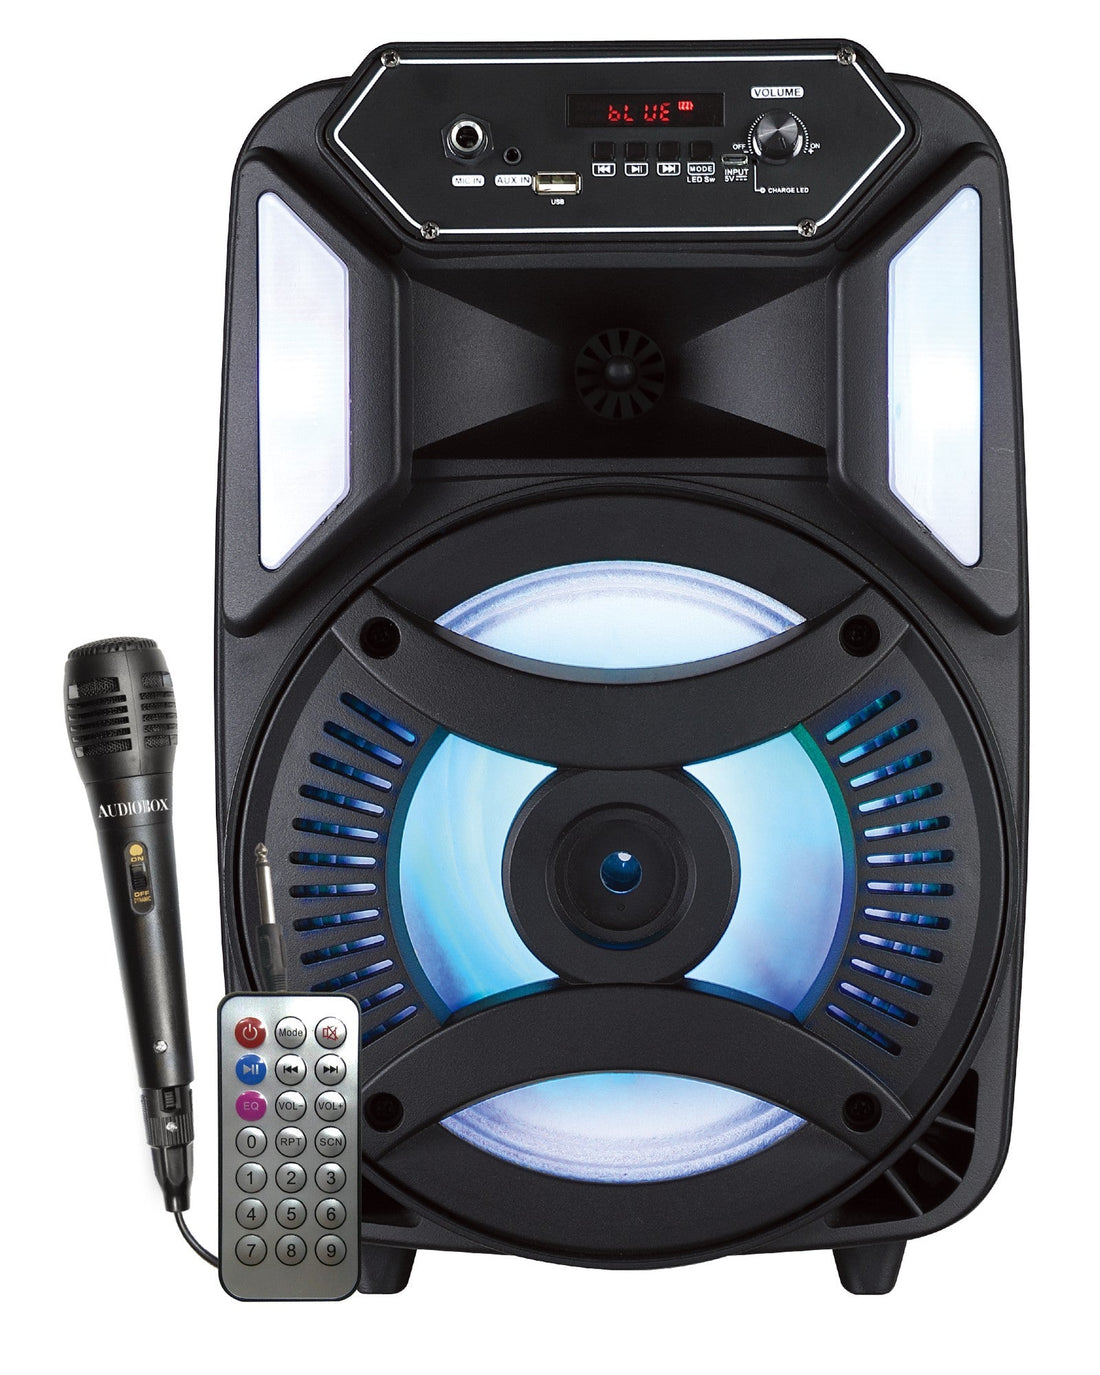 Audiobox Portable PA Speaker 8 Inch with LED Light Show - Bluetooth, USB, AUX Connectivity for Parties and Karaoke - Top ElectrosKaraoke SpeakerABX-800R810059431997